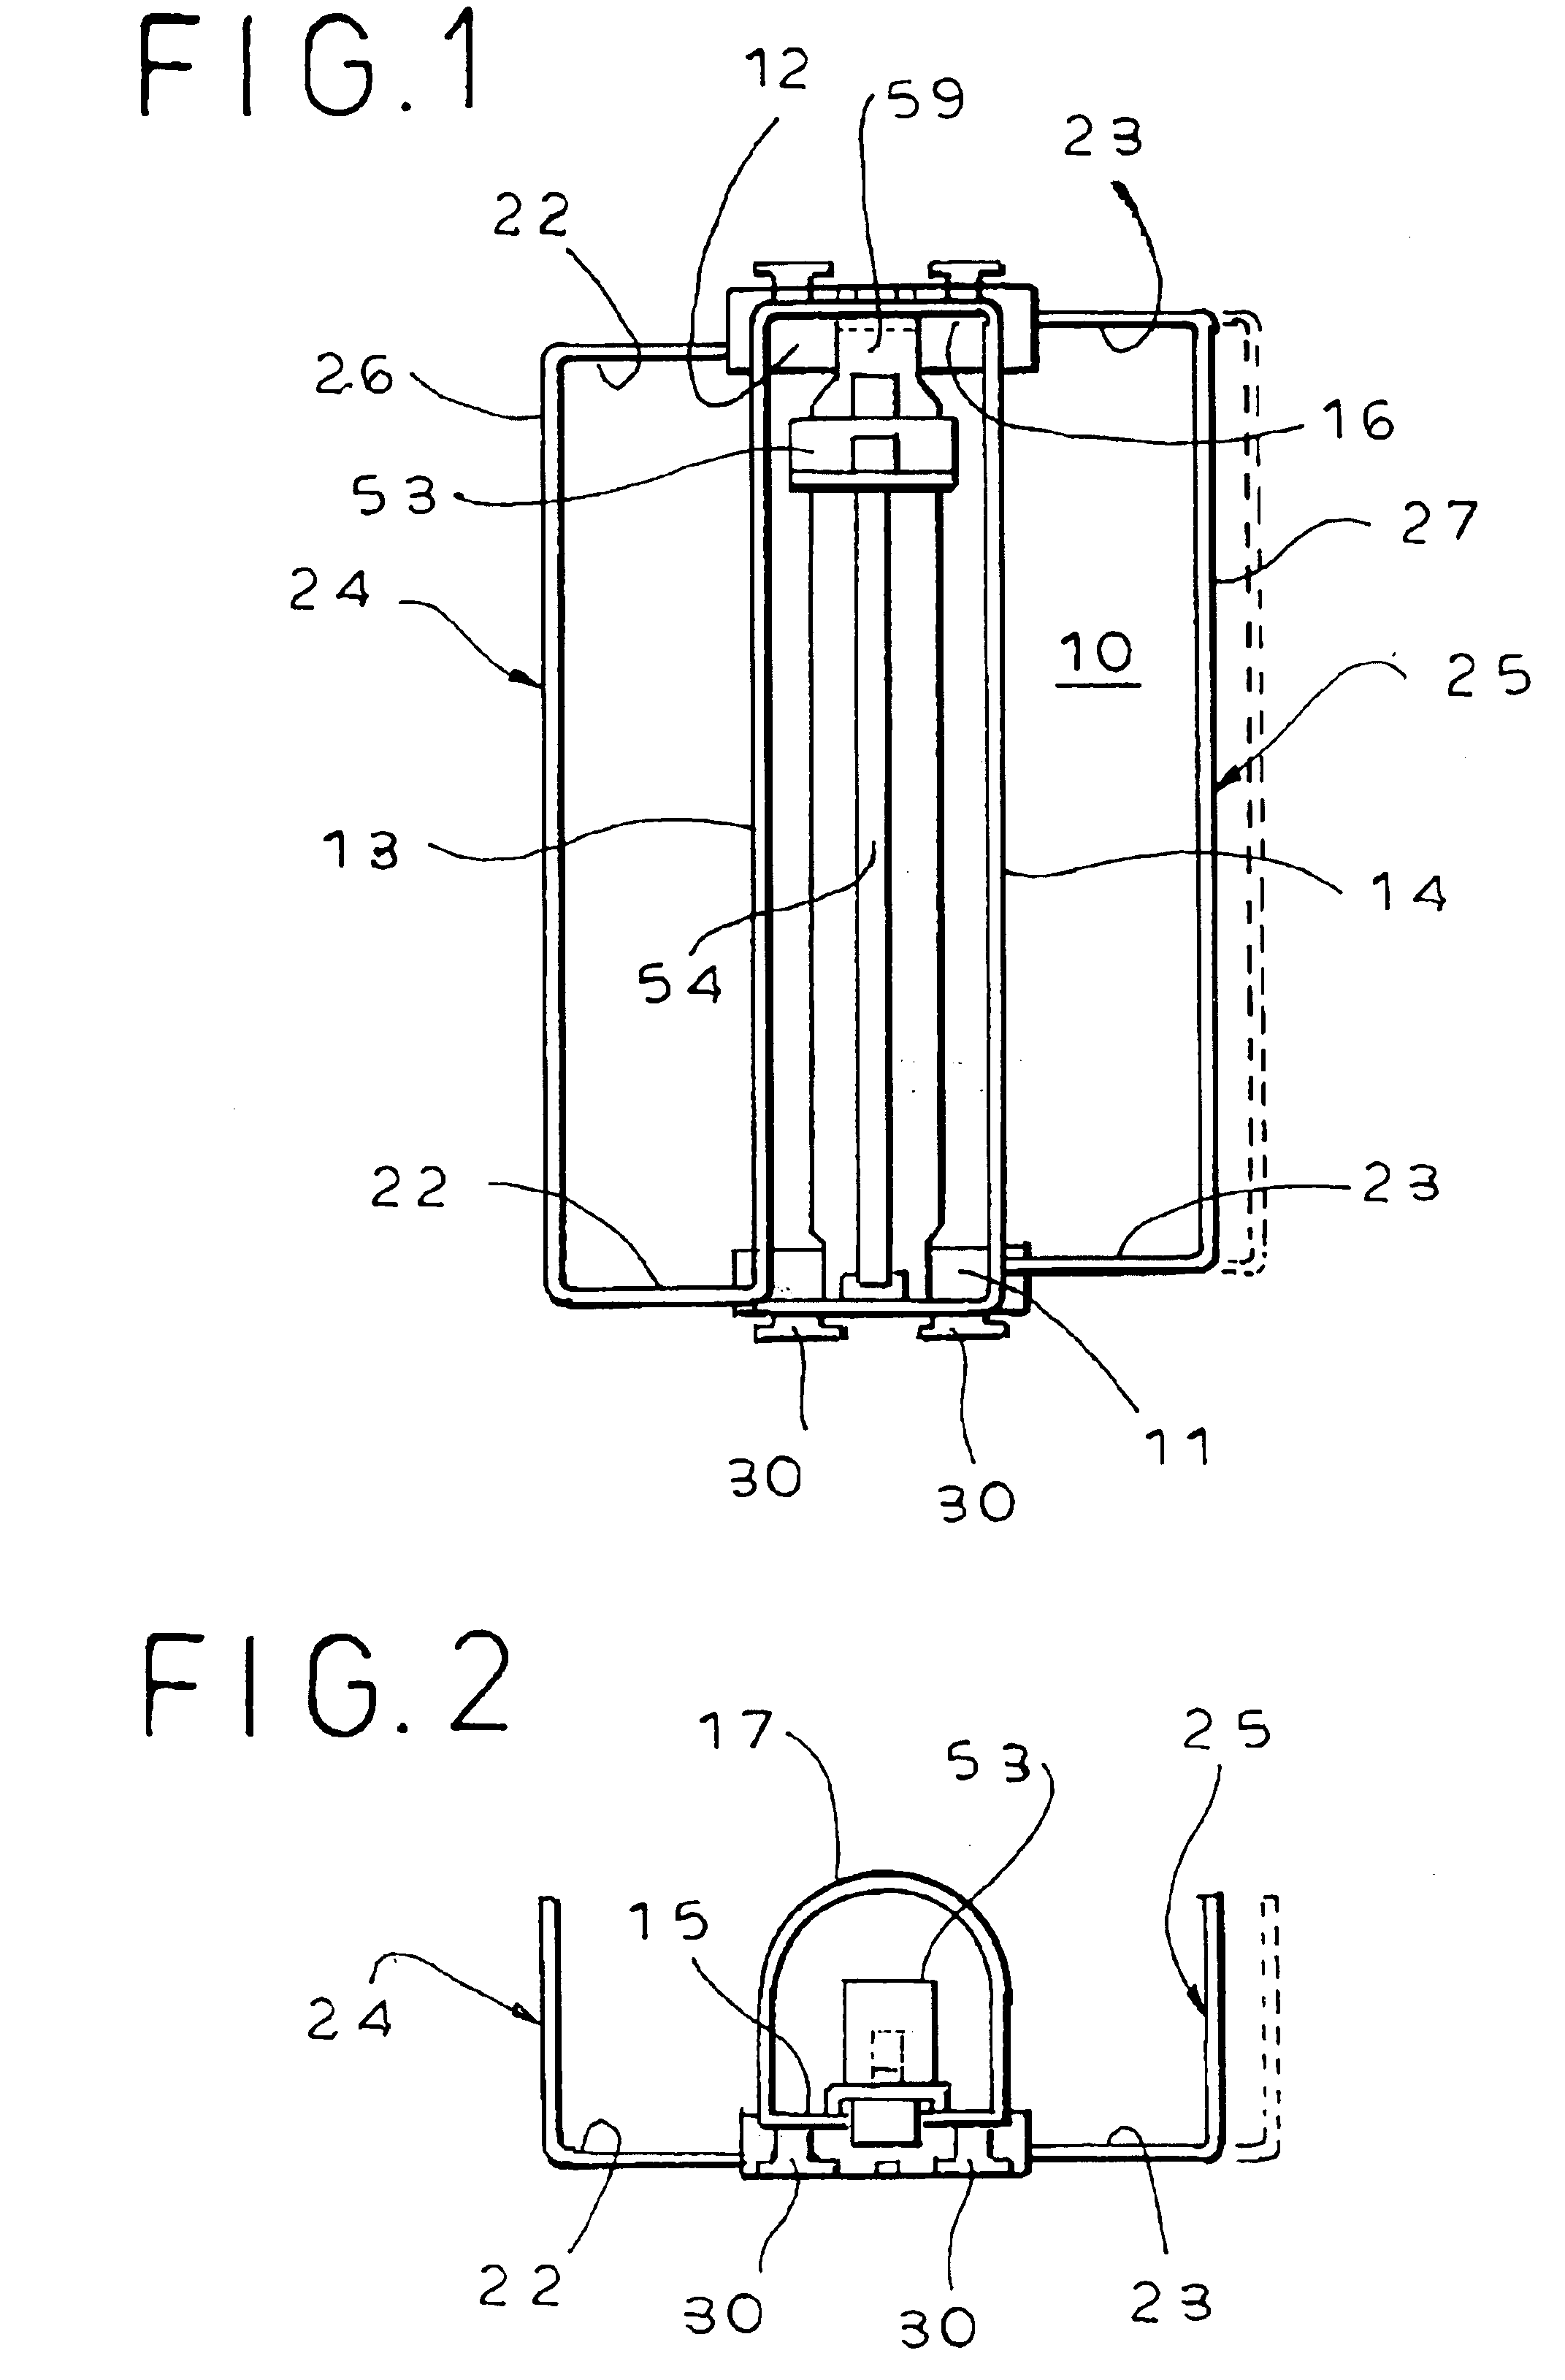 Adjustable width product display system